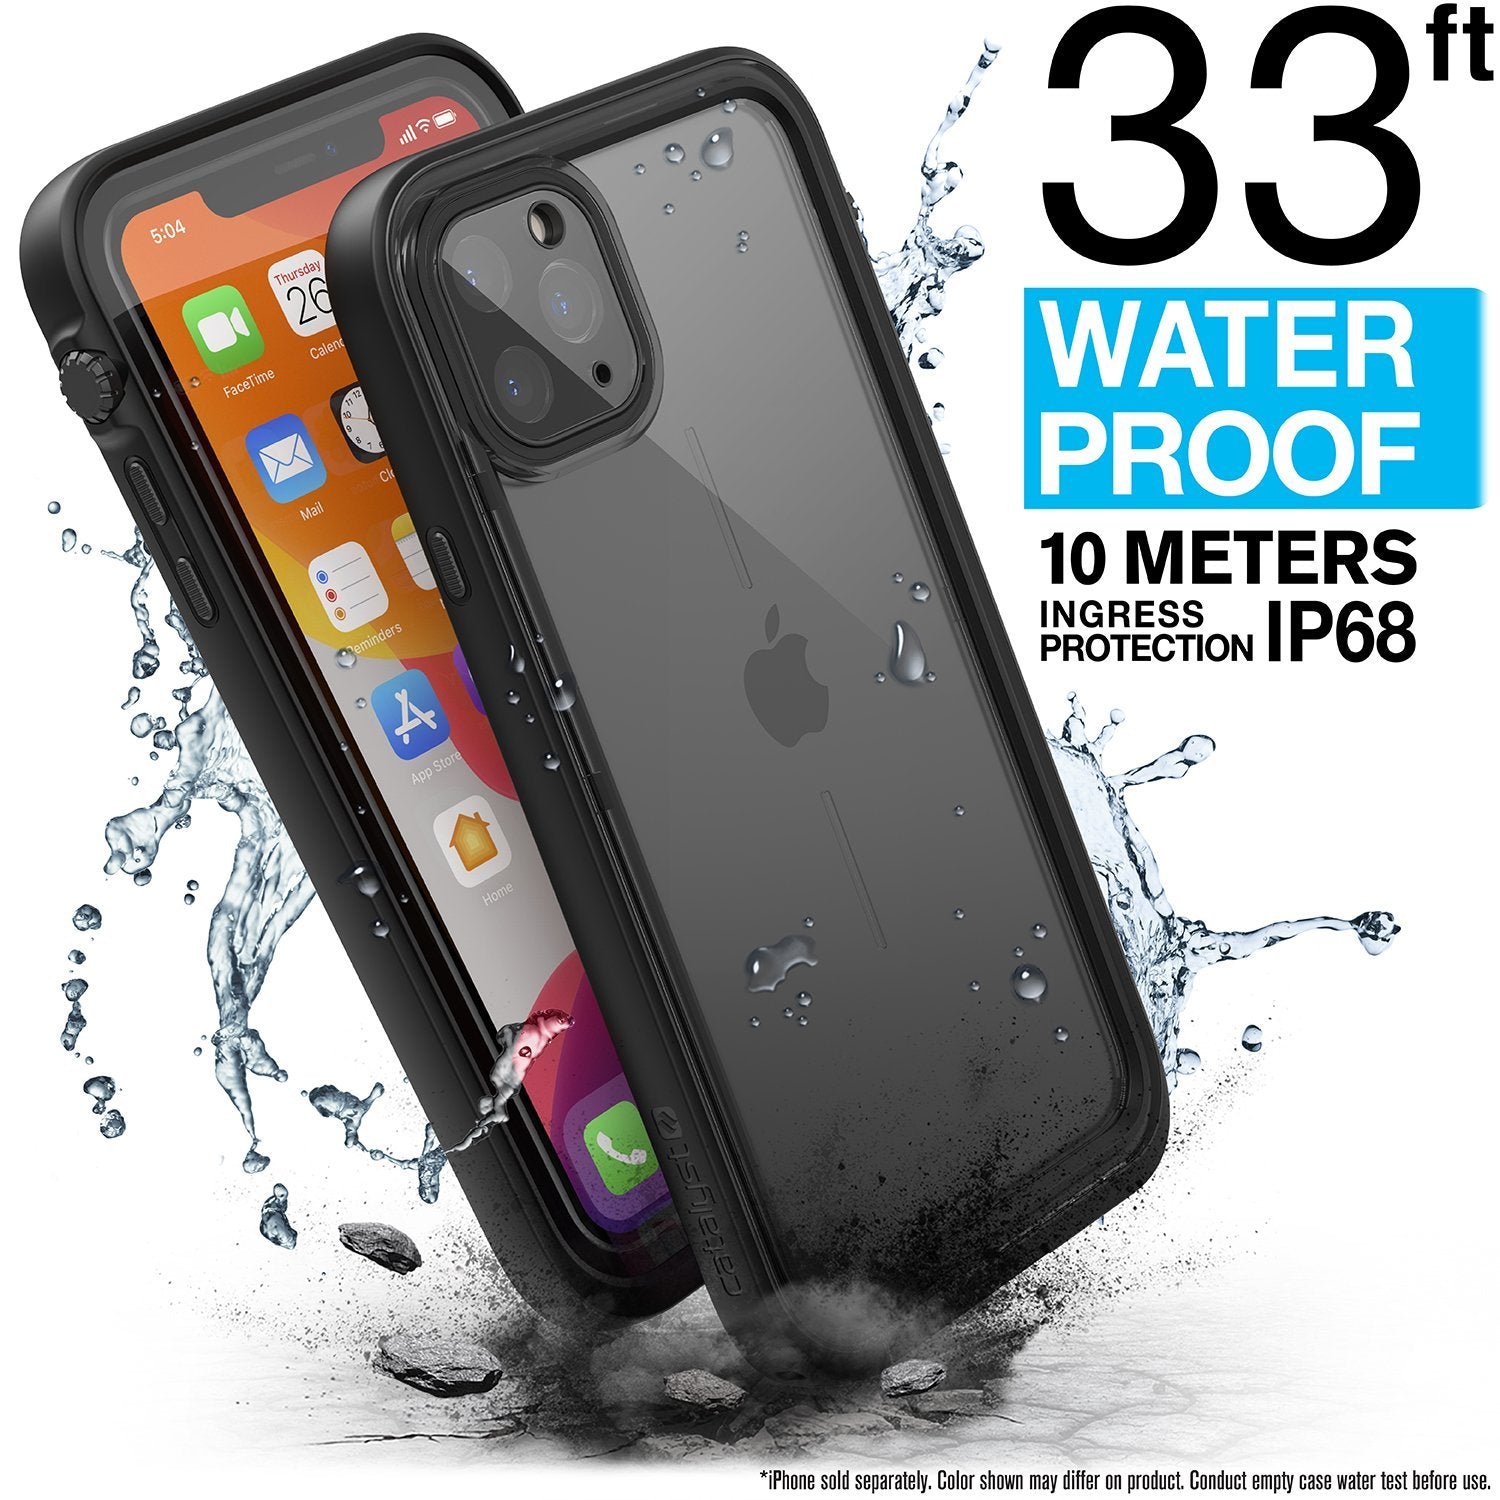 Catalyst iphone 11 pro max waterproof case showing the case being drop proof and waterproof in stealth black colorway